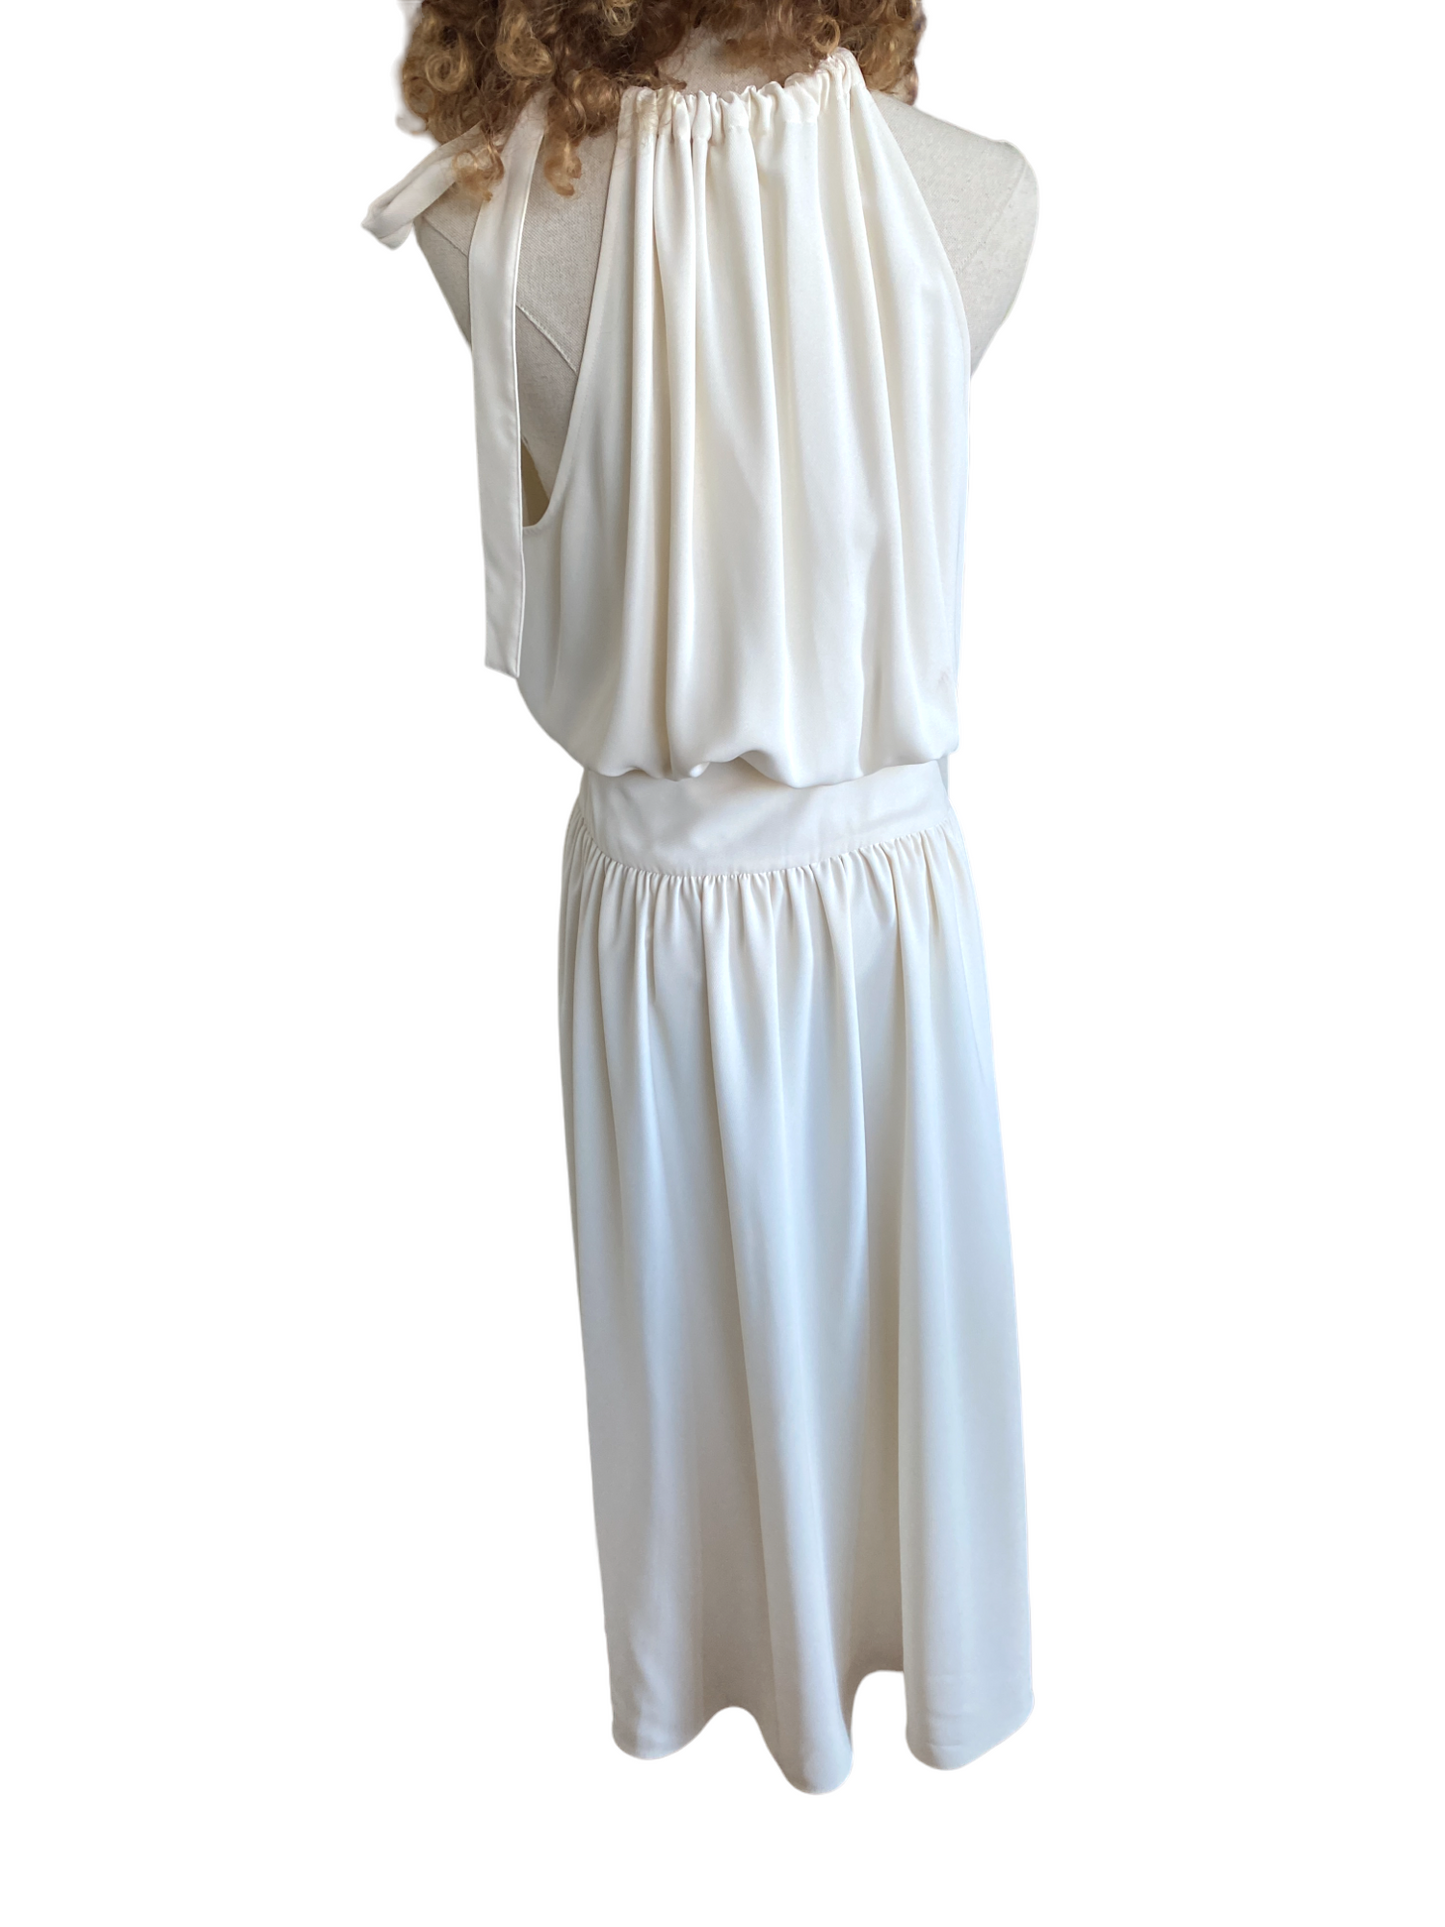 Zimmermann Tie Neck Picnic Dress | Thick Elastic Waistband, Pearl White $890 RP